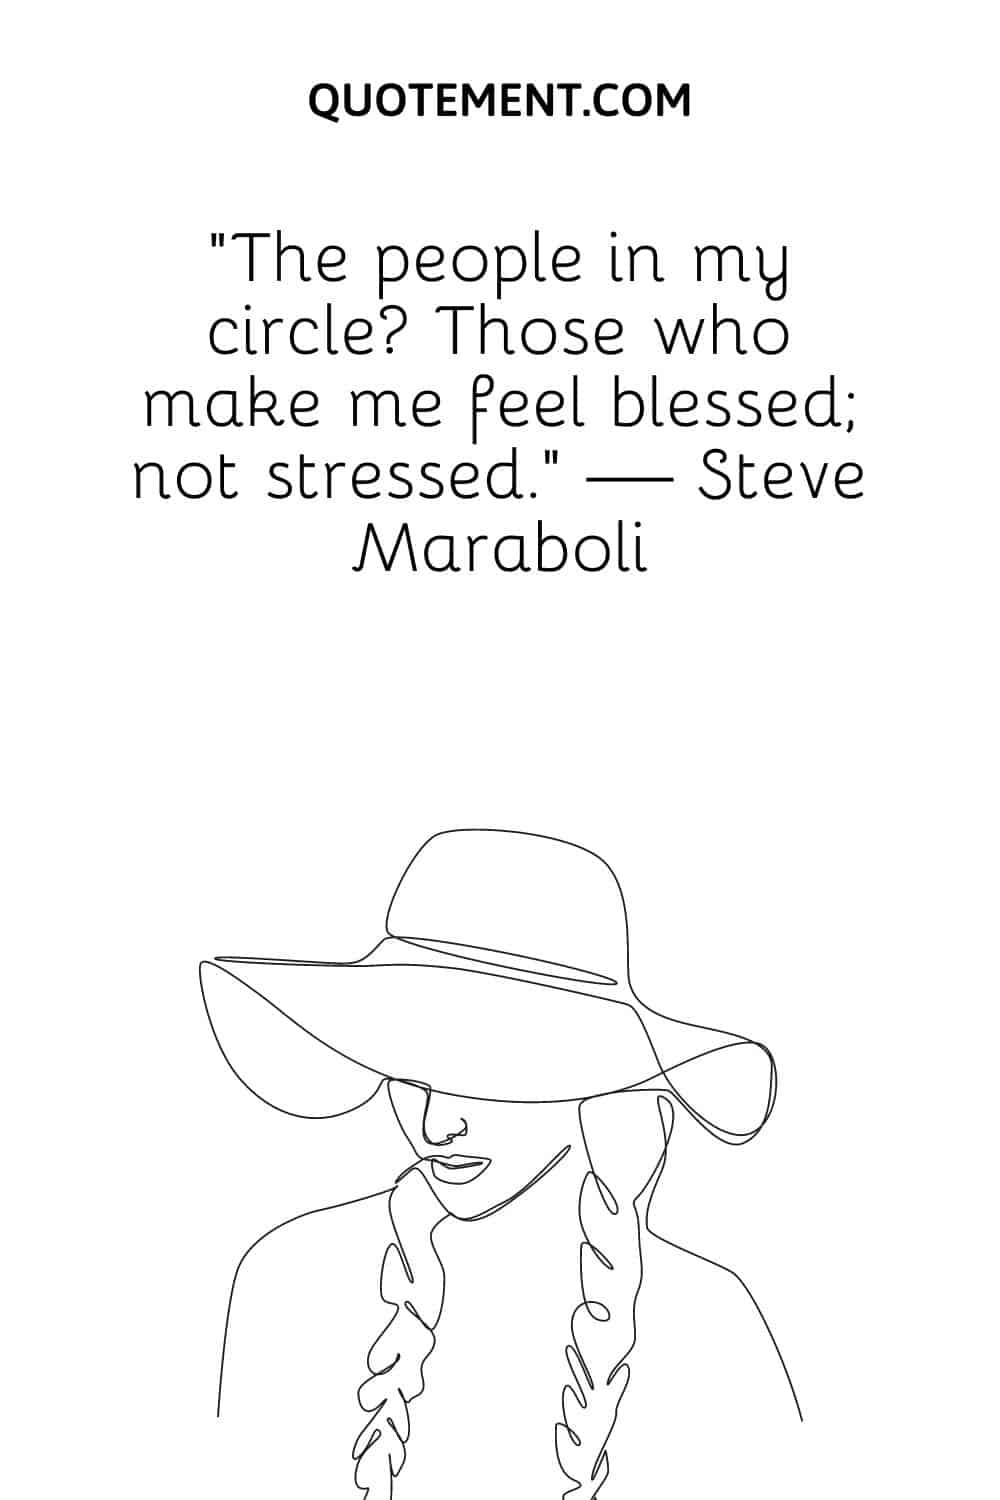 The people in my circle Those who make me feel blessed; not stressed